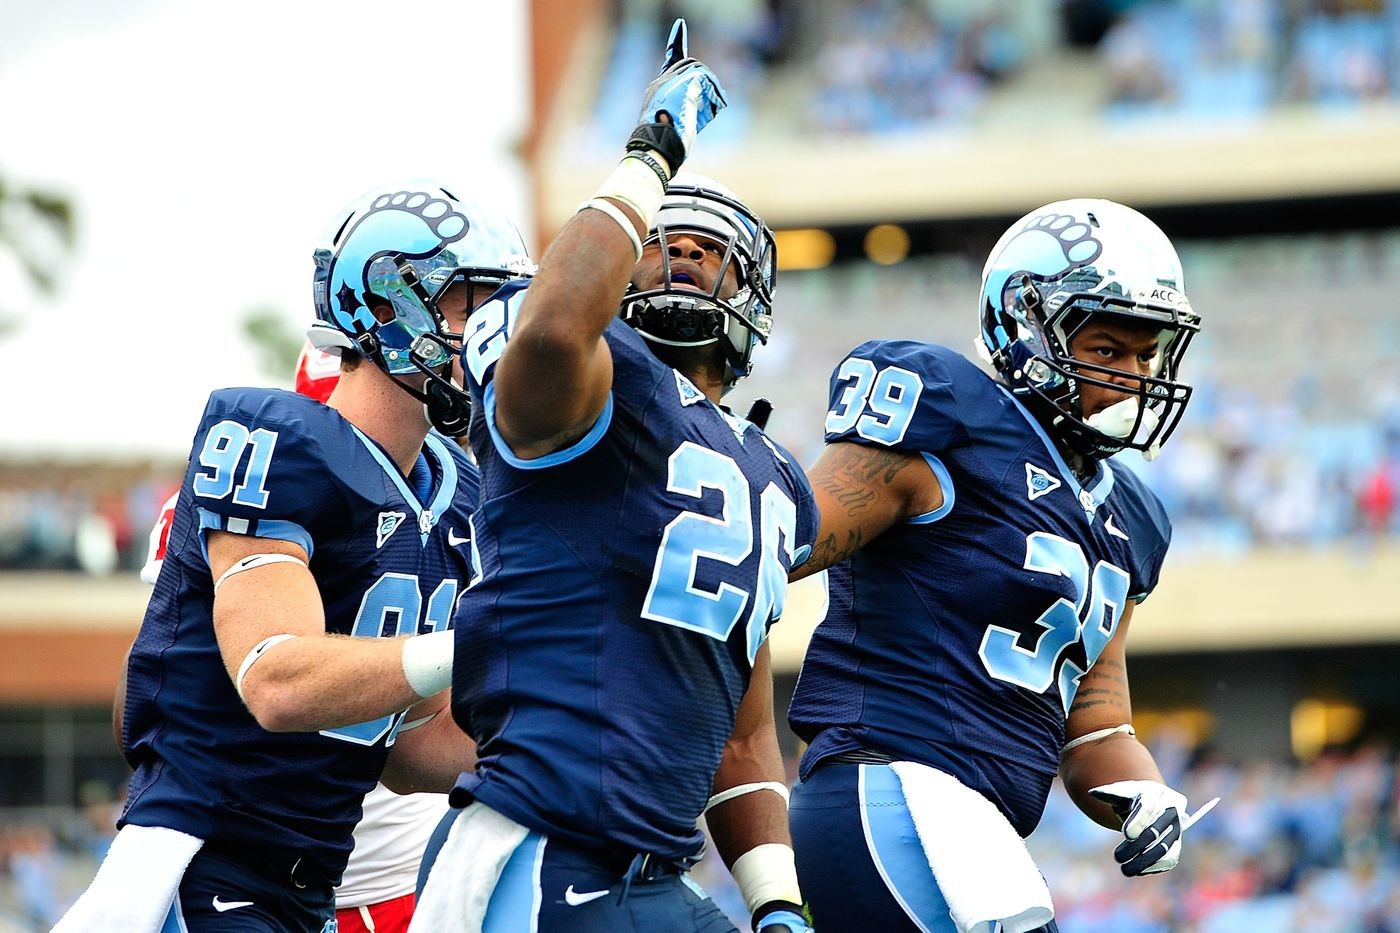 A look at the 2023 UNC football schedule through the lens of history